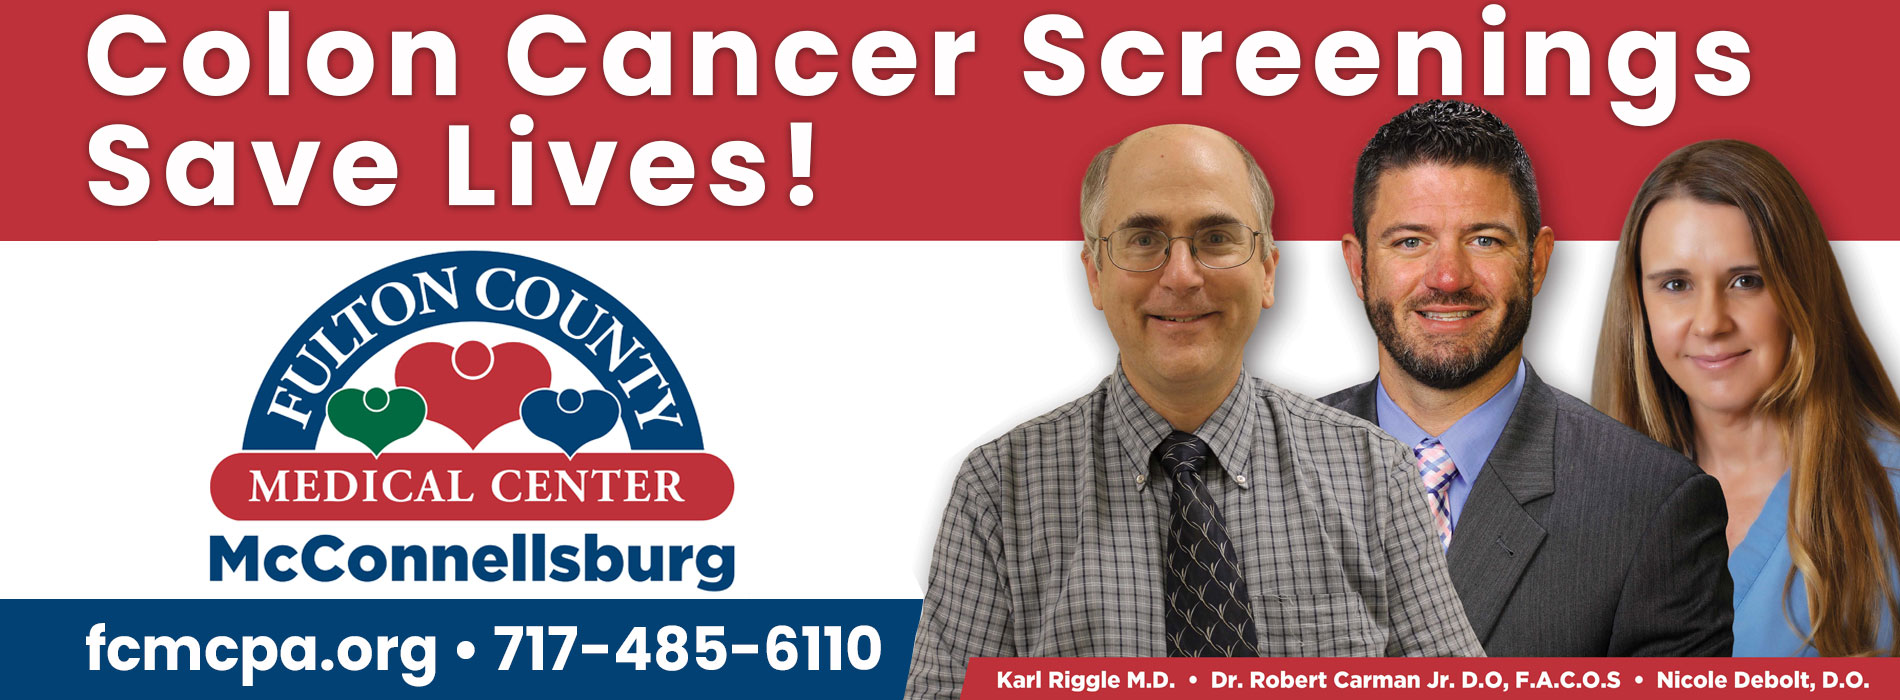 Colon Cancer Screenings Save Lives!

Karl Riggle M.D.
Dr. Robert Carman Jr. D.O, F.A.C.O.S
Nicole Debolt, D.O.

fcmcpa.org
717-485-6110

FULTON COUNTY MEDICAL CENTER
McConnellsburg